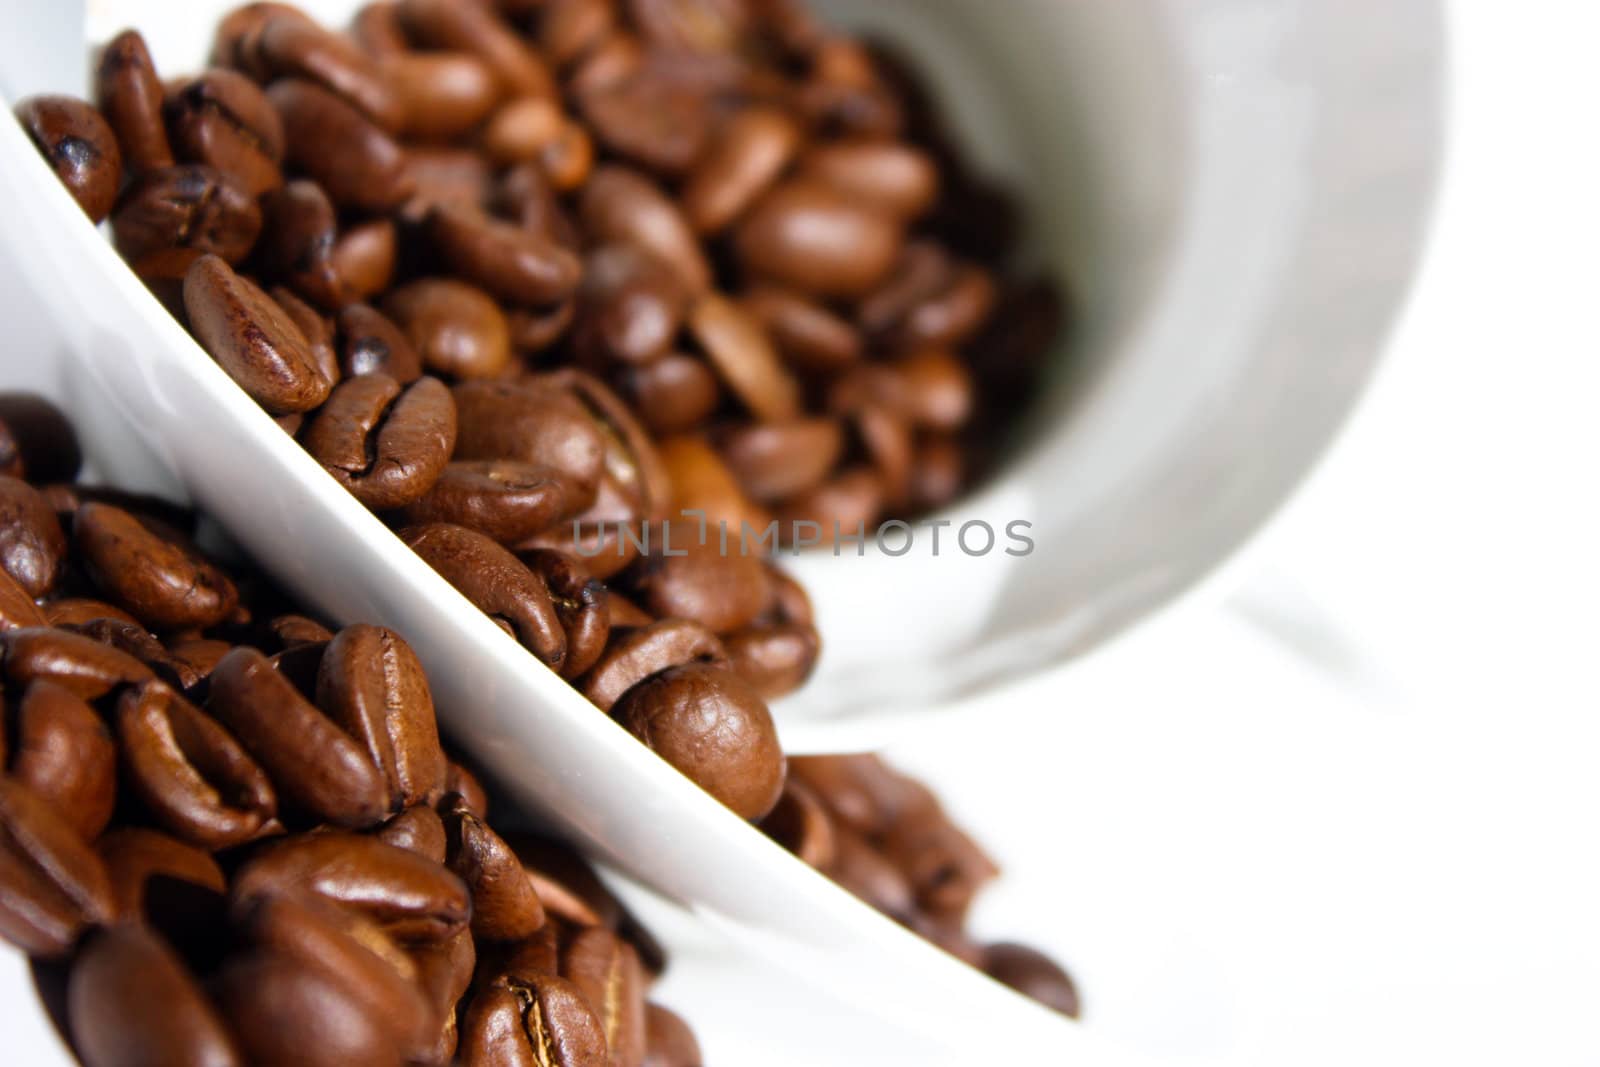 spilled coffee, coffee beans, porcelain saucer, white cup and saucer, fresh coffee beans